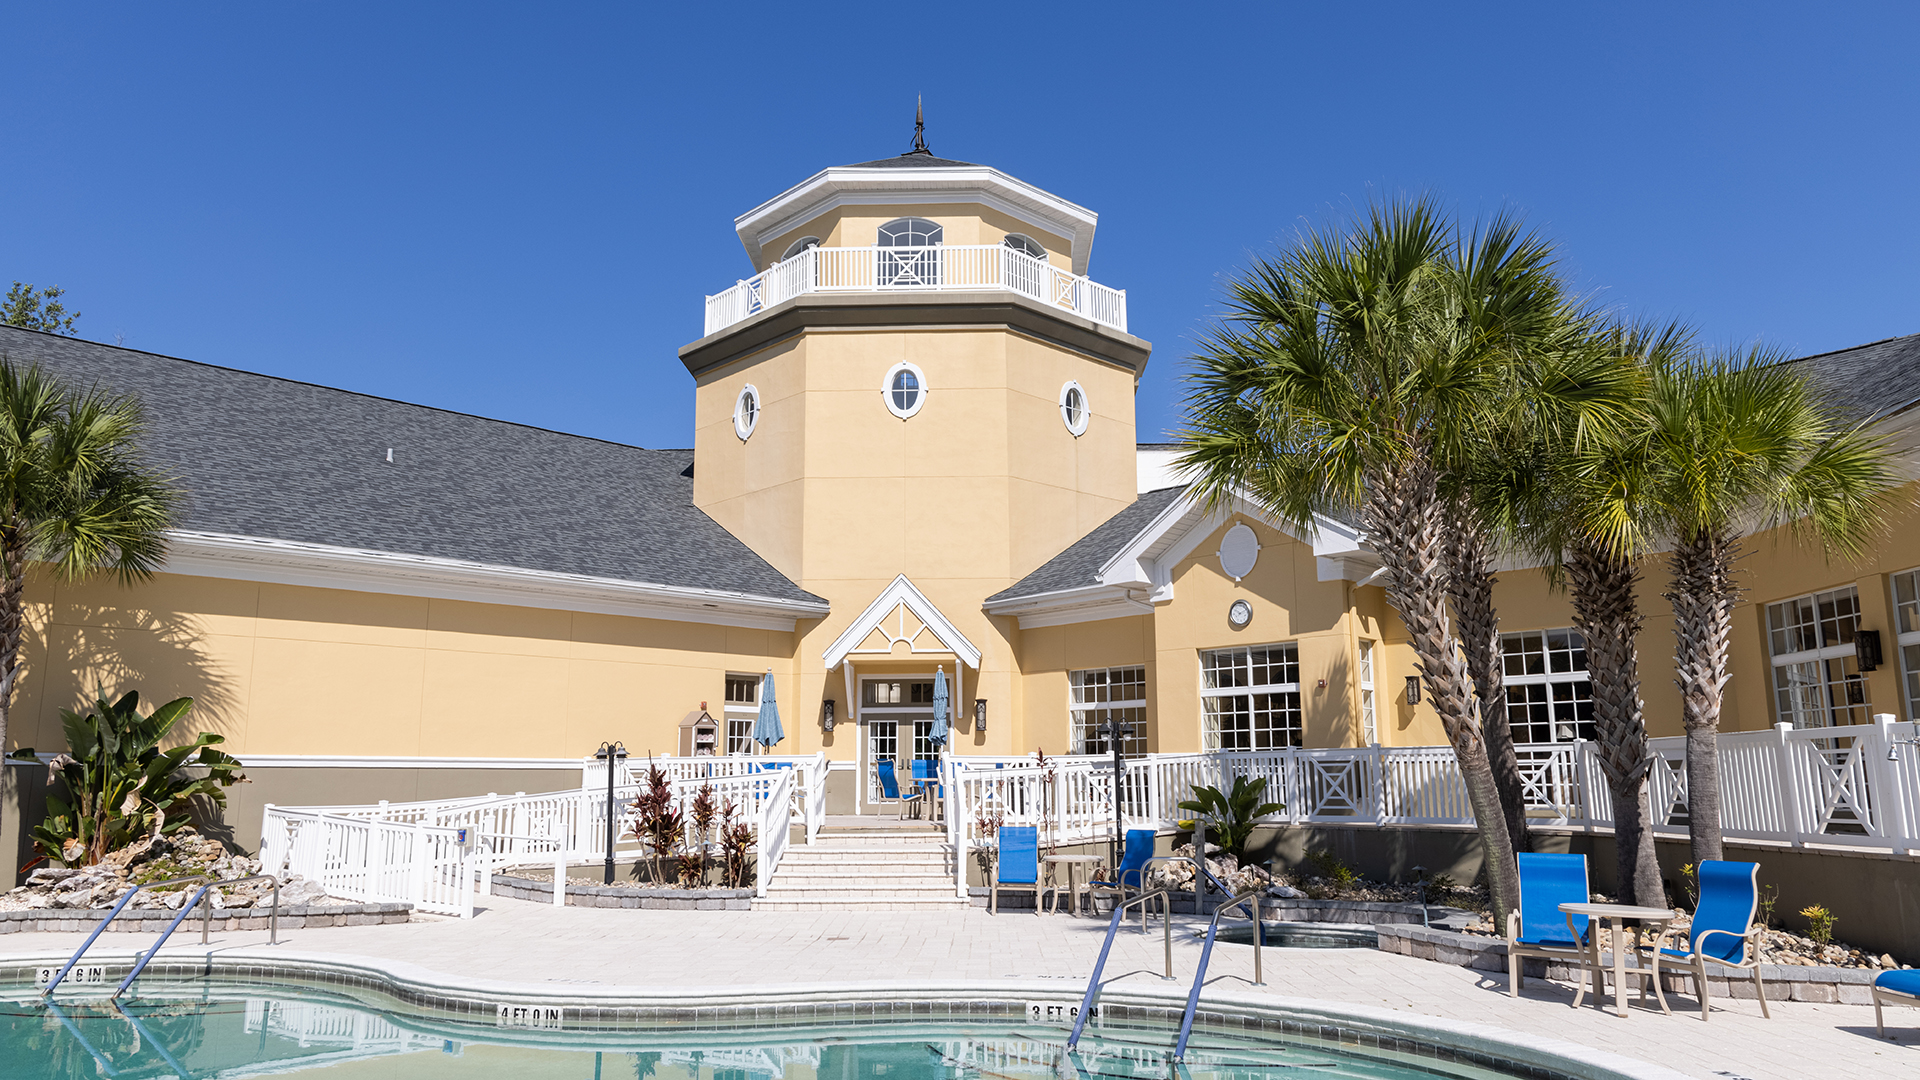 Santa Fe The Village at Gainesville Senior Living Community outdoor pool and club house